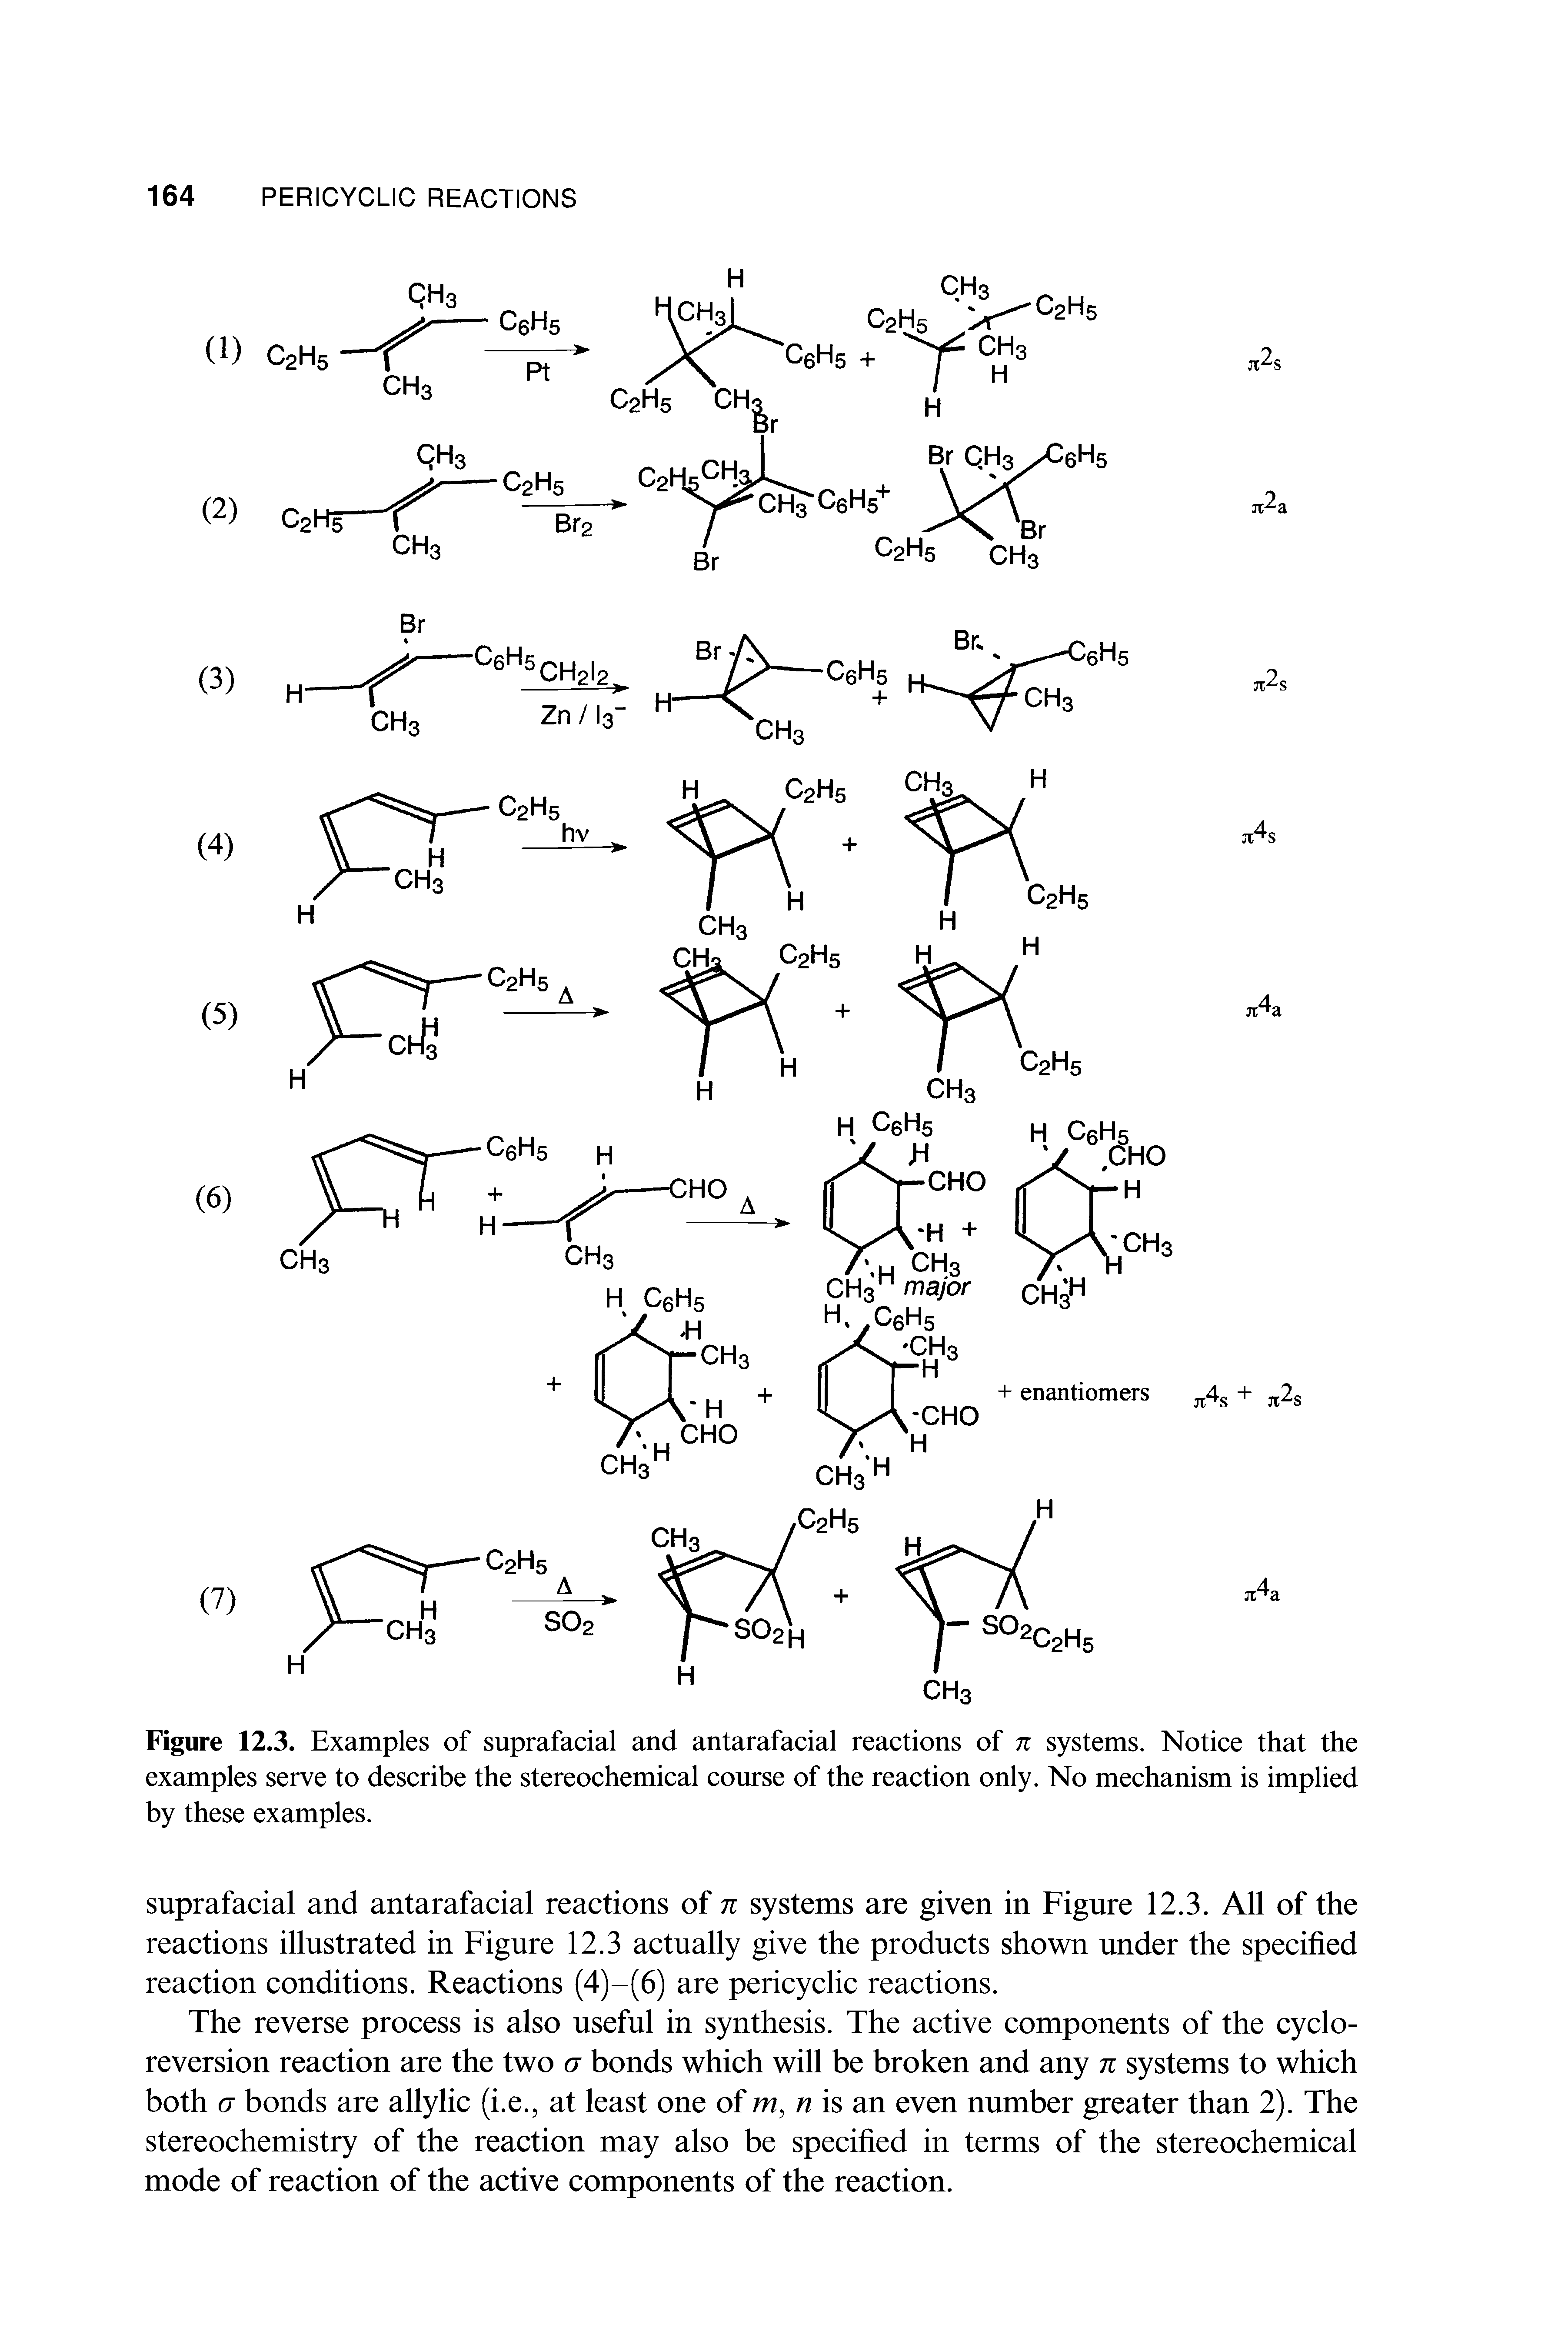 Figure 12.3. Examples of suprafacial and antarafacial reactions of n systems. Notice that the examples serve to describe the stereochemical course of the reaction only. No mechanism is implied by these examples.